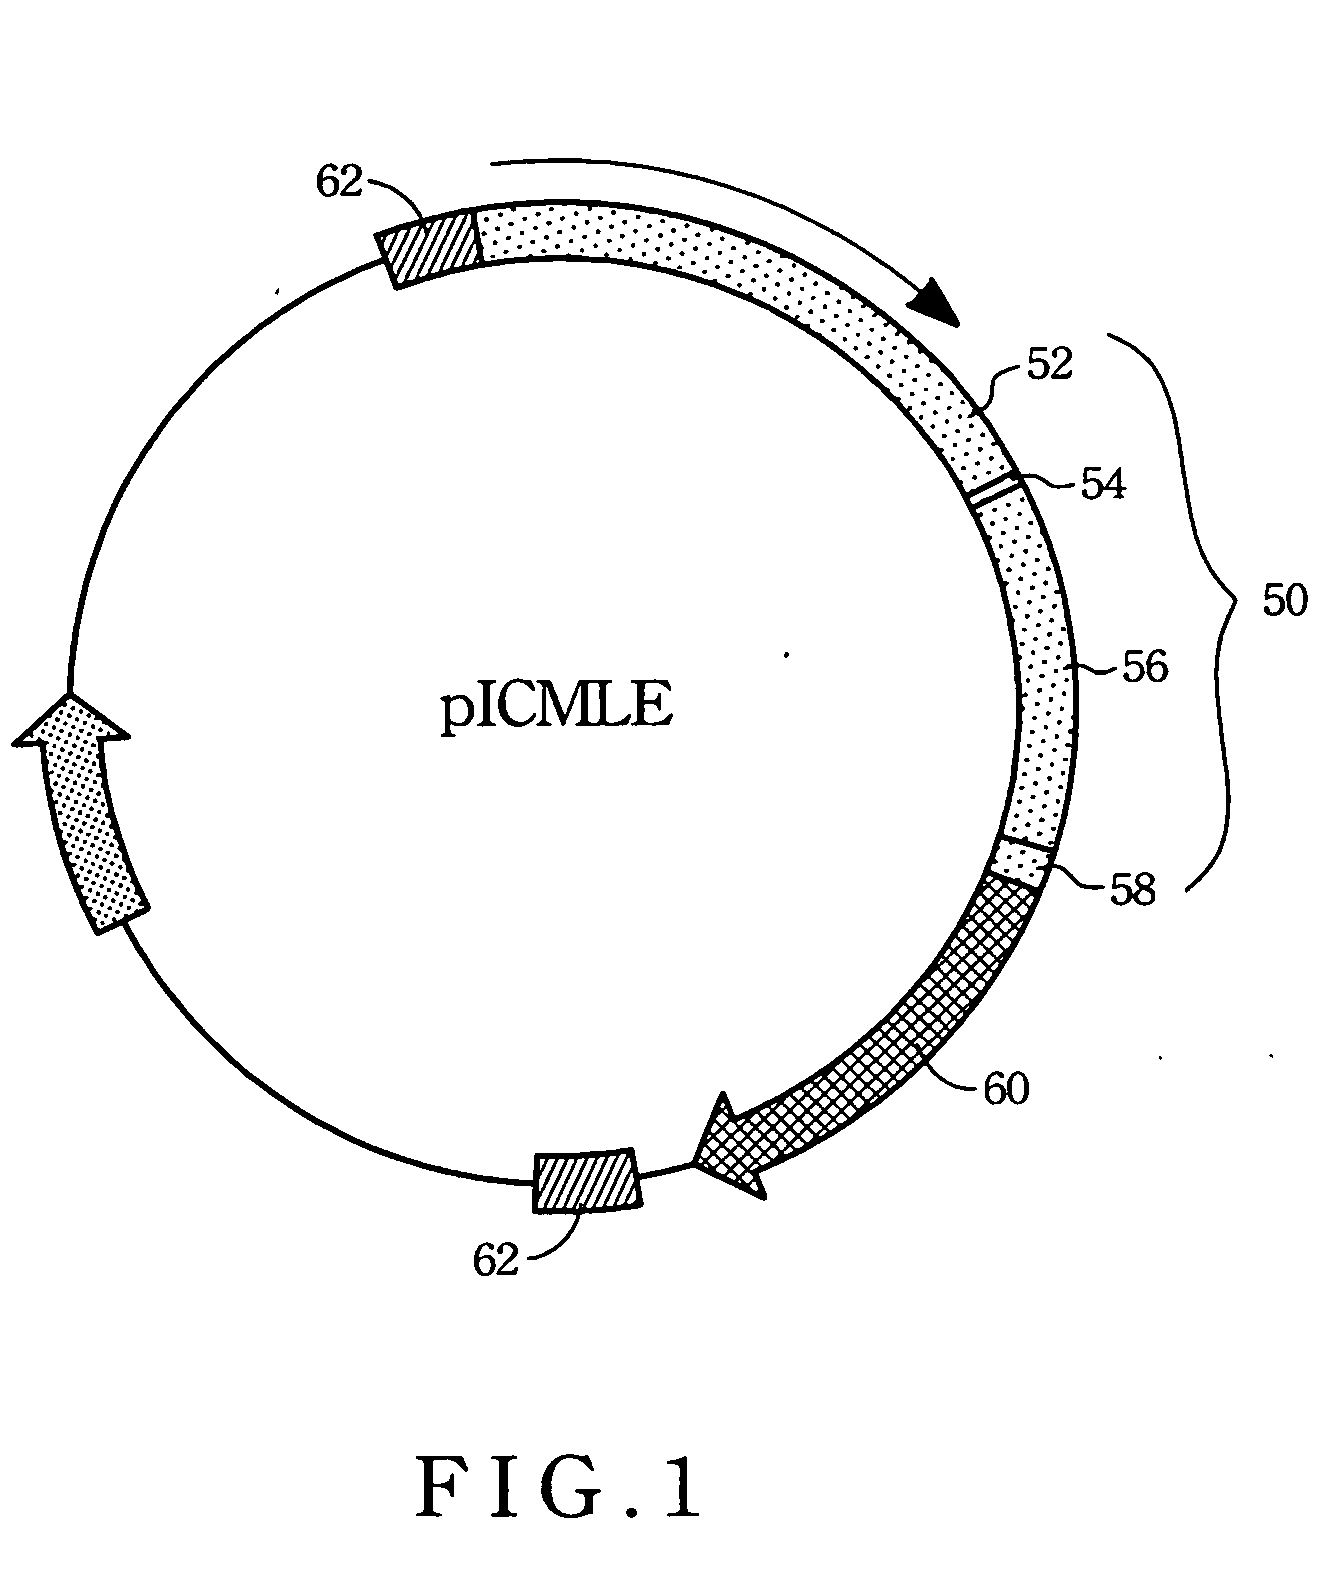 Method for producing heart-specific fluorescence of non-human eukaryotic animals